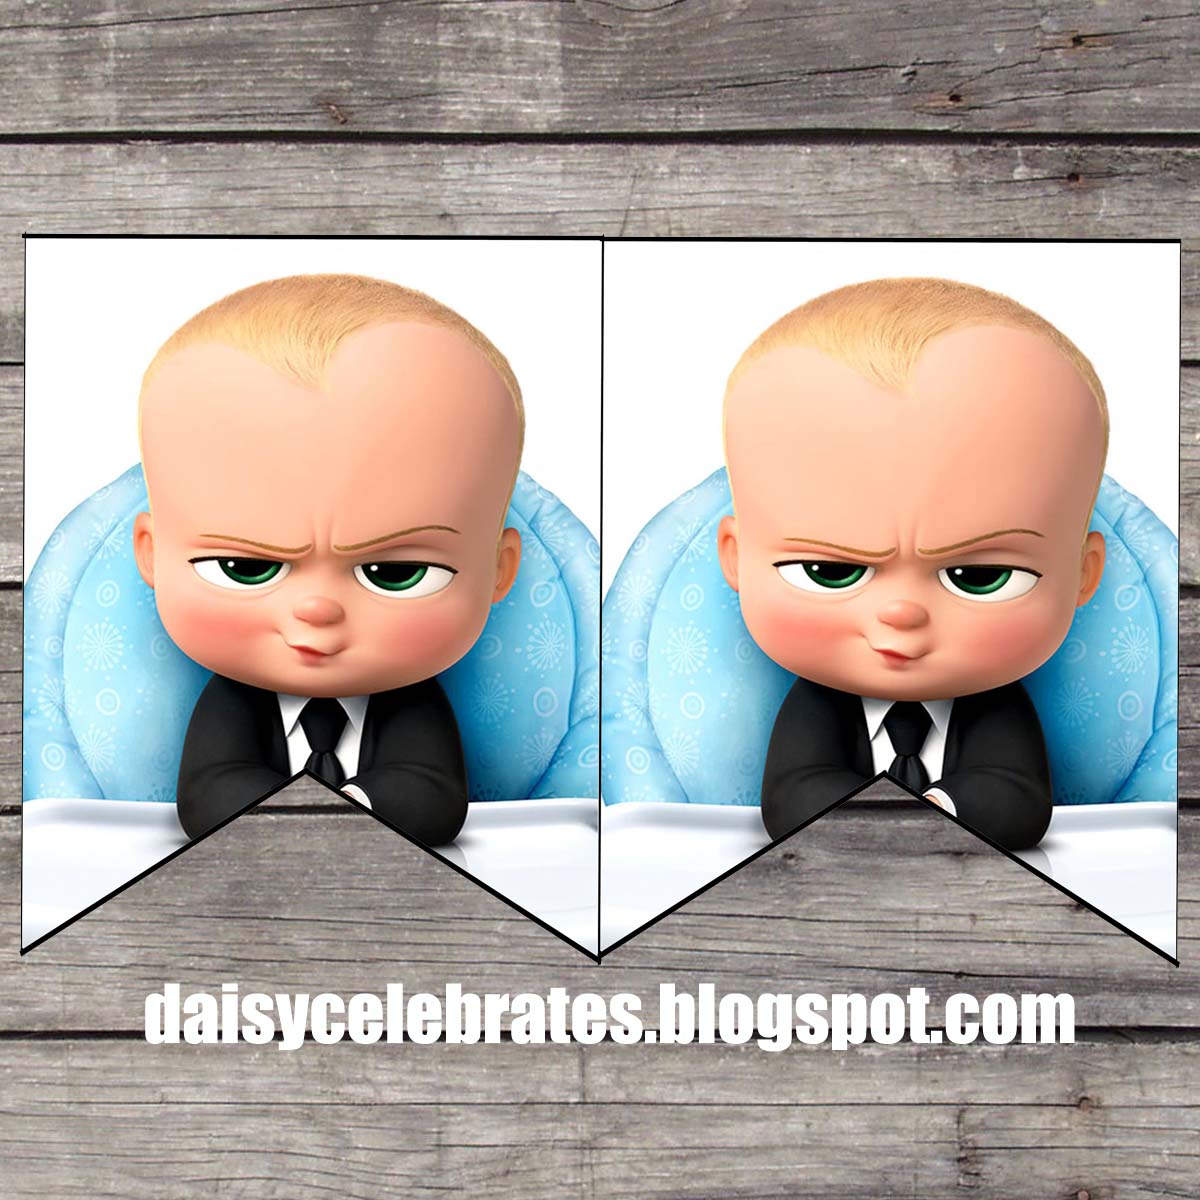 Royals Acrylic Cake Toppers (Boss Baby) : Amazon.in: Toys & Games